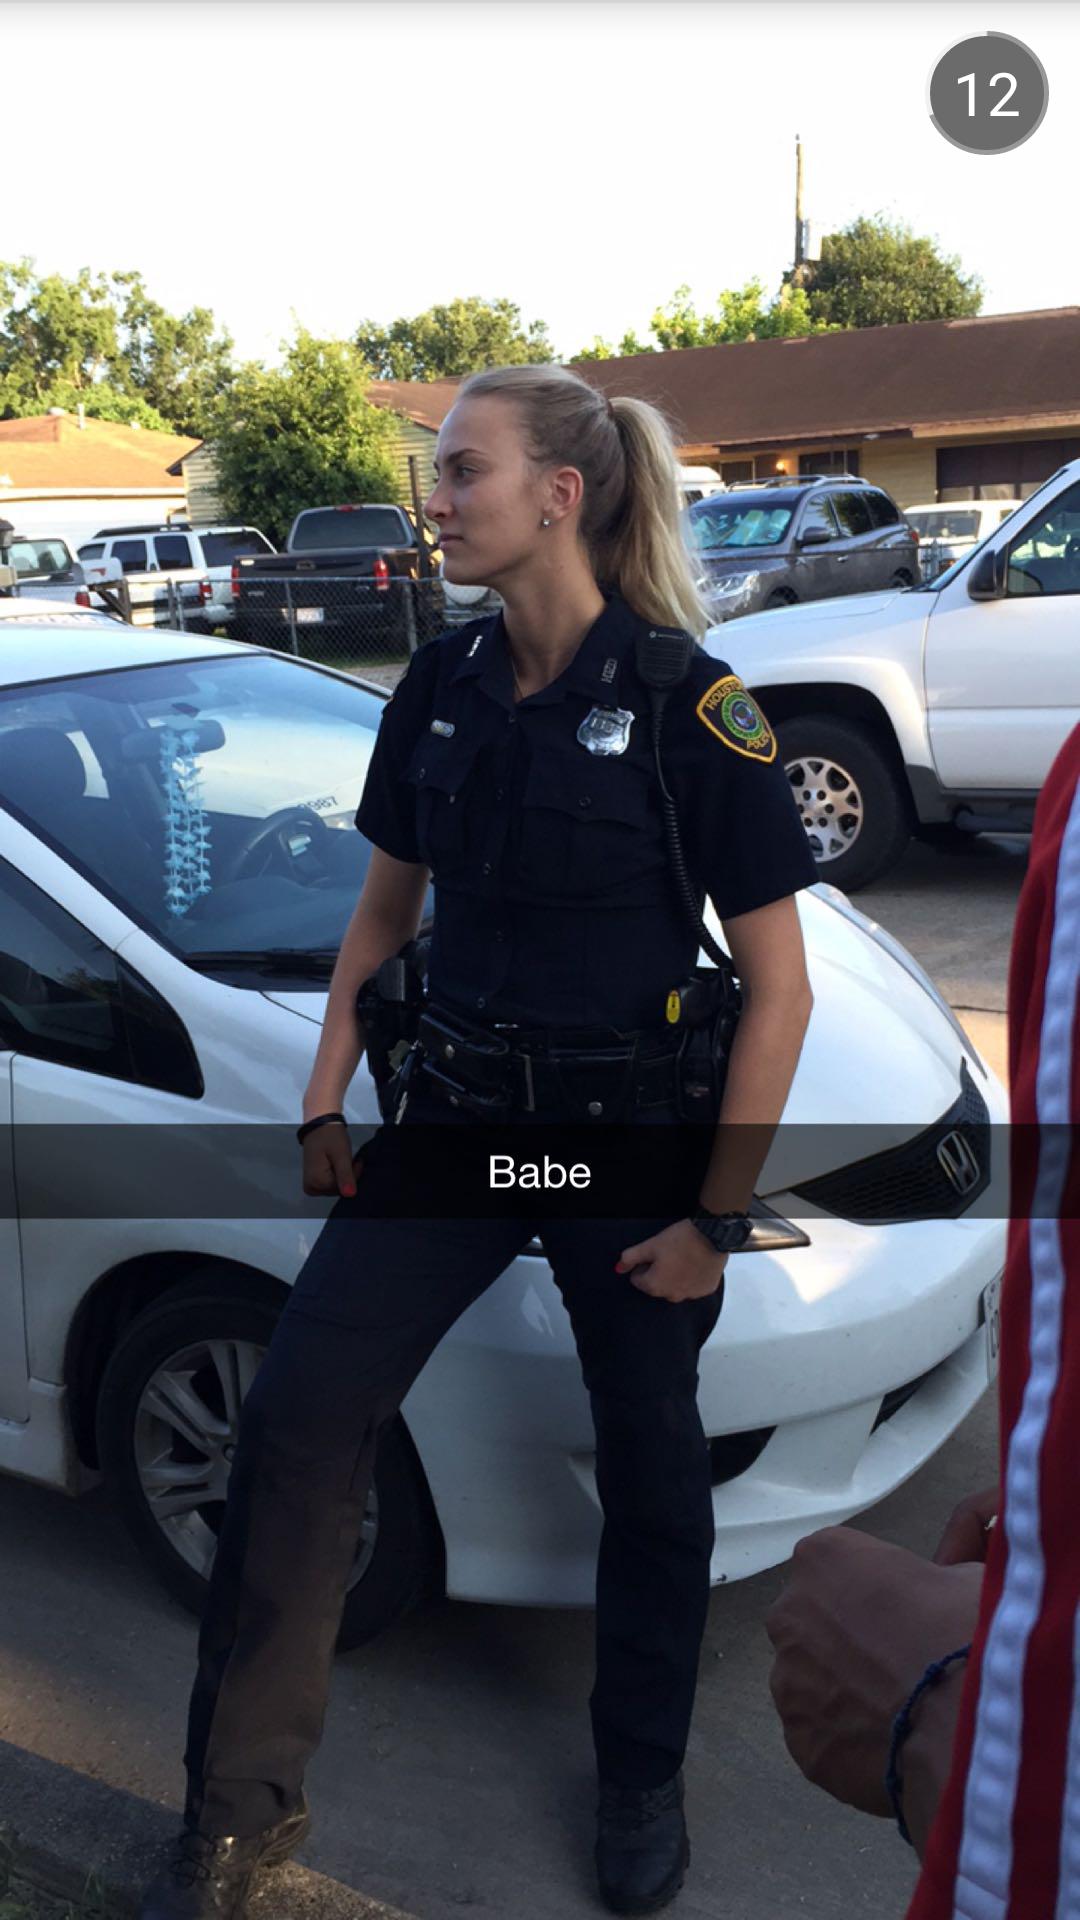 hot girl police officers - Babe